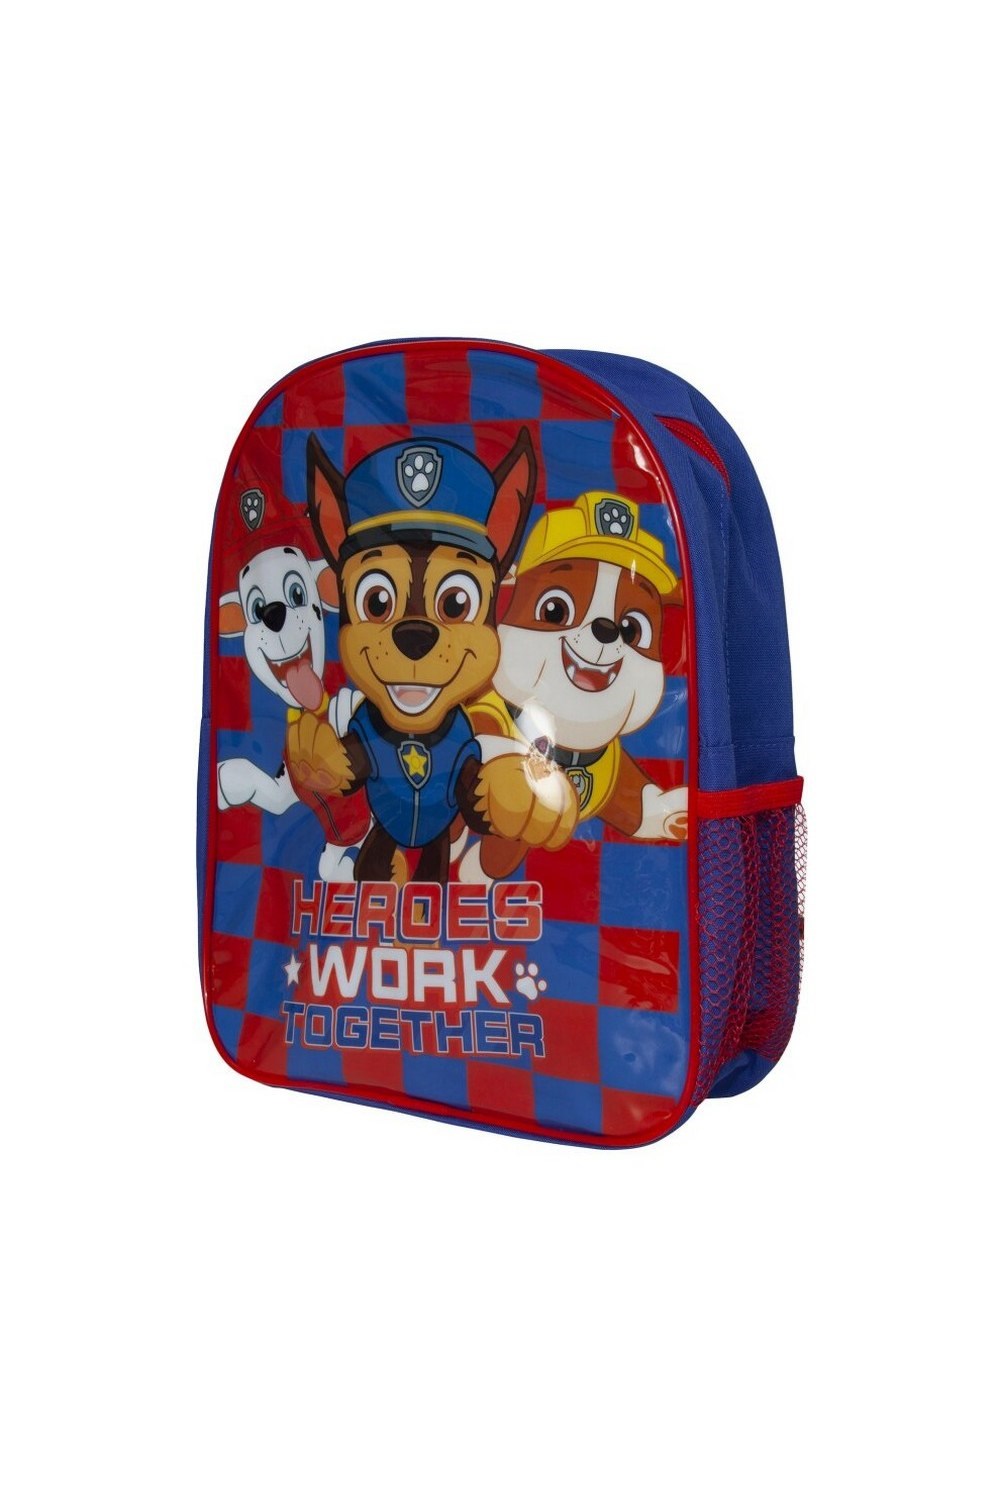 Kids Heroes Work Together Arch Backpack -